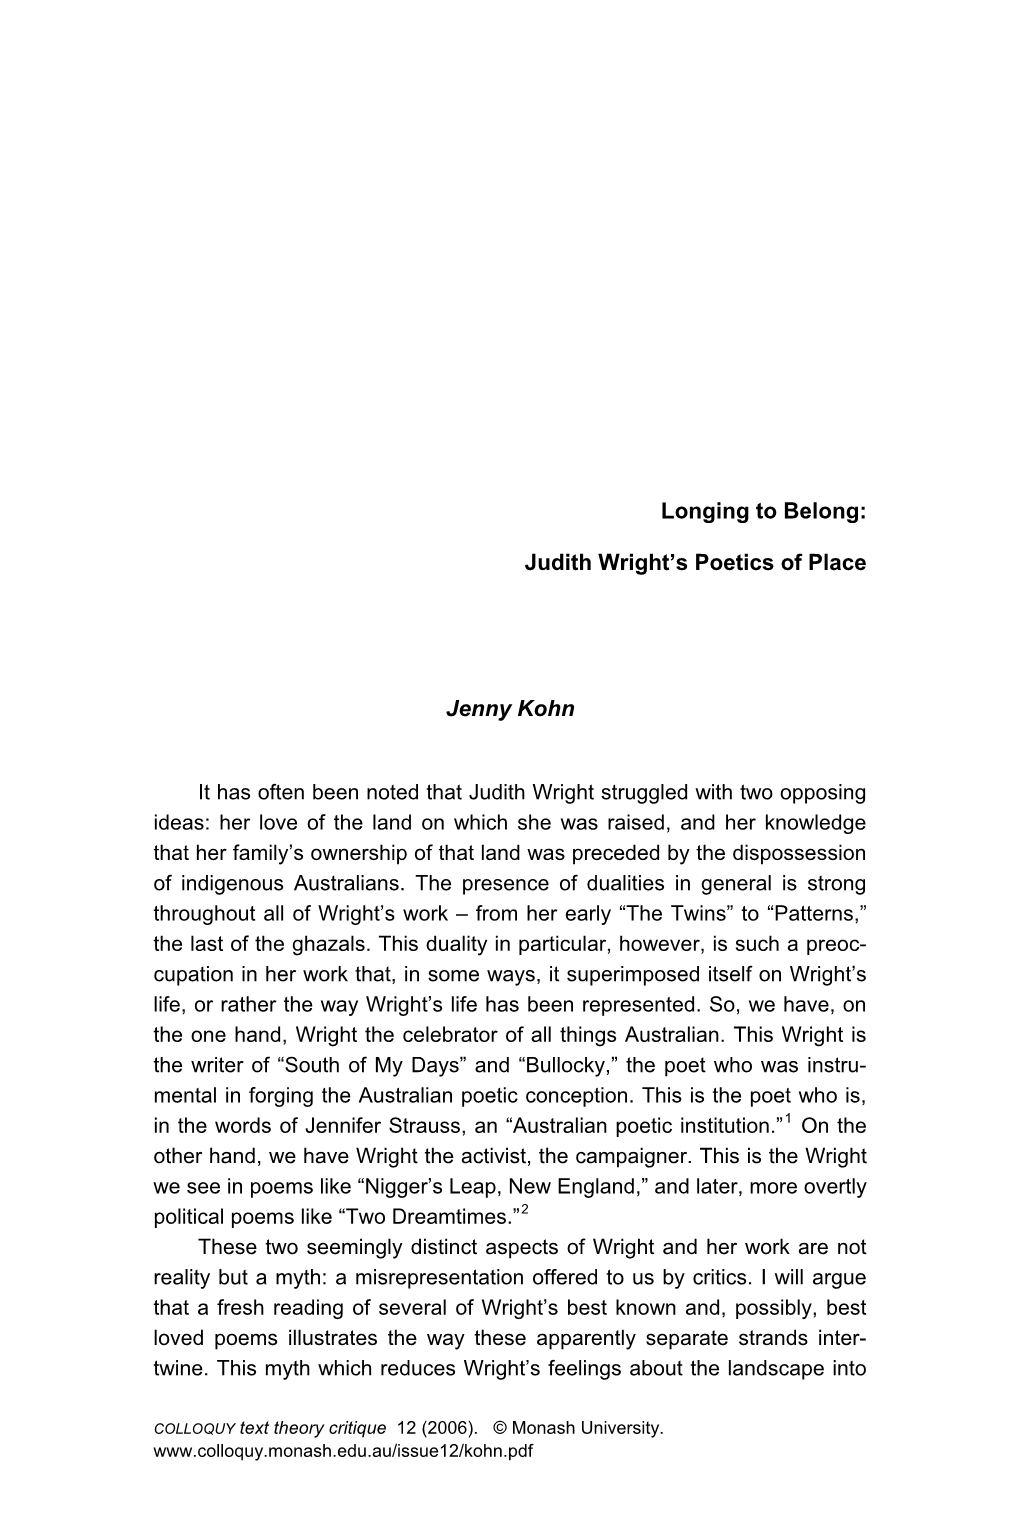 Longing to Belong: Judith Wright's Poetics of Place